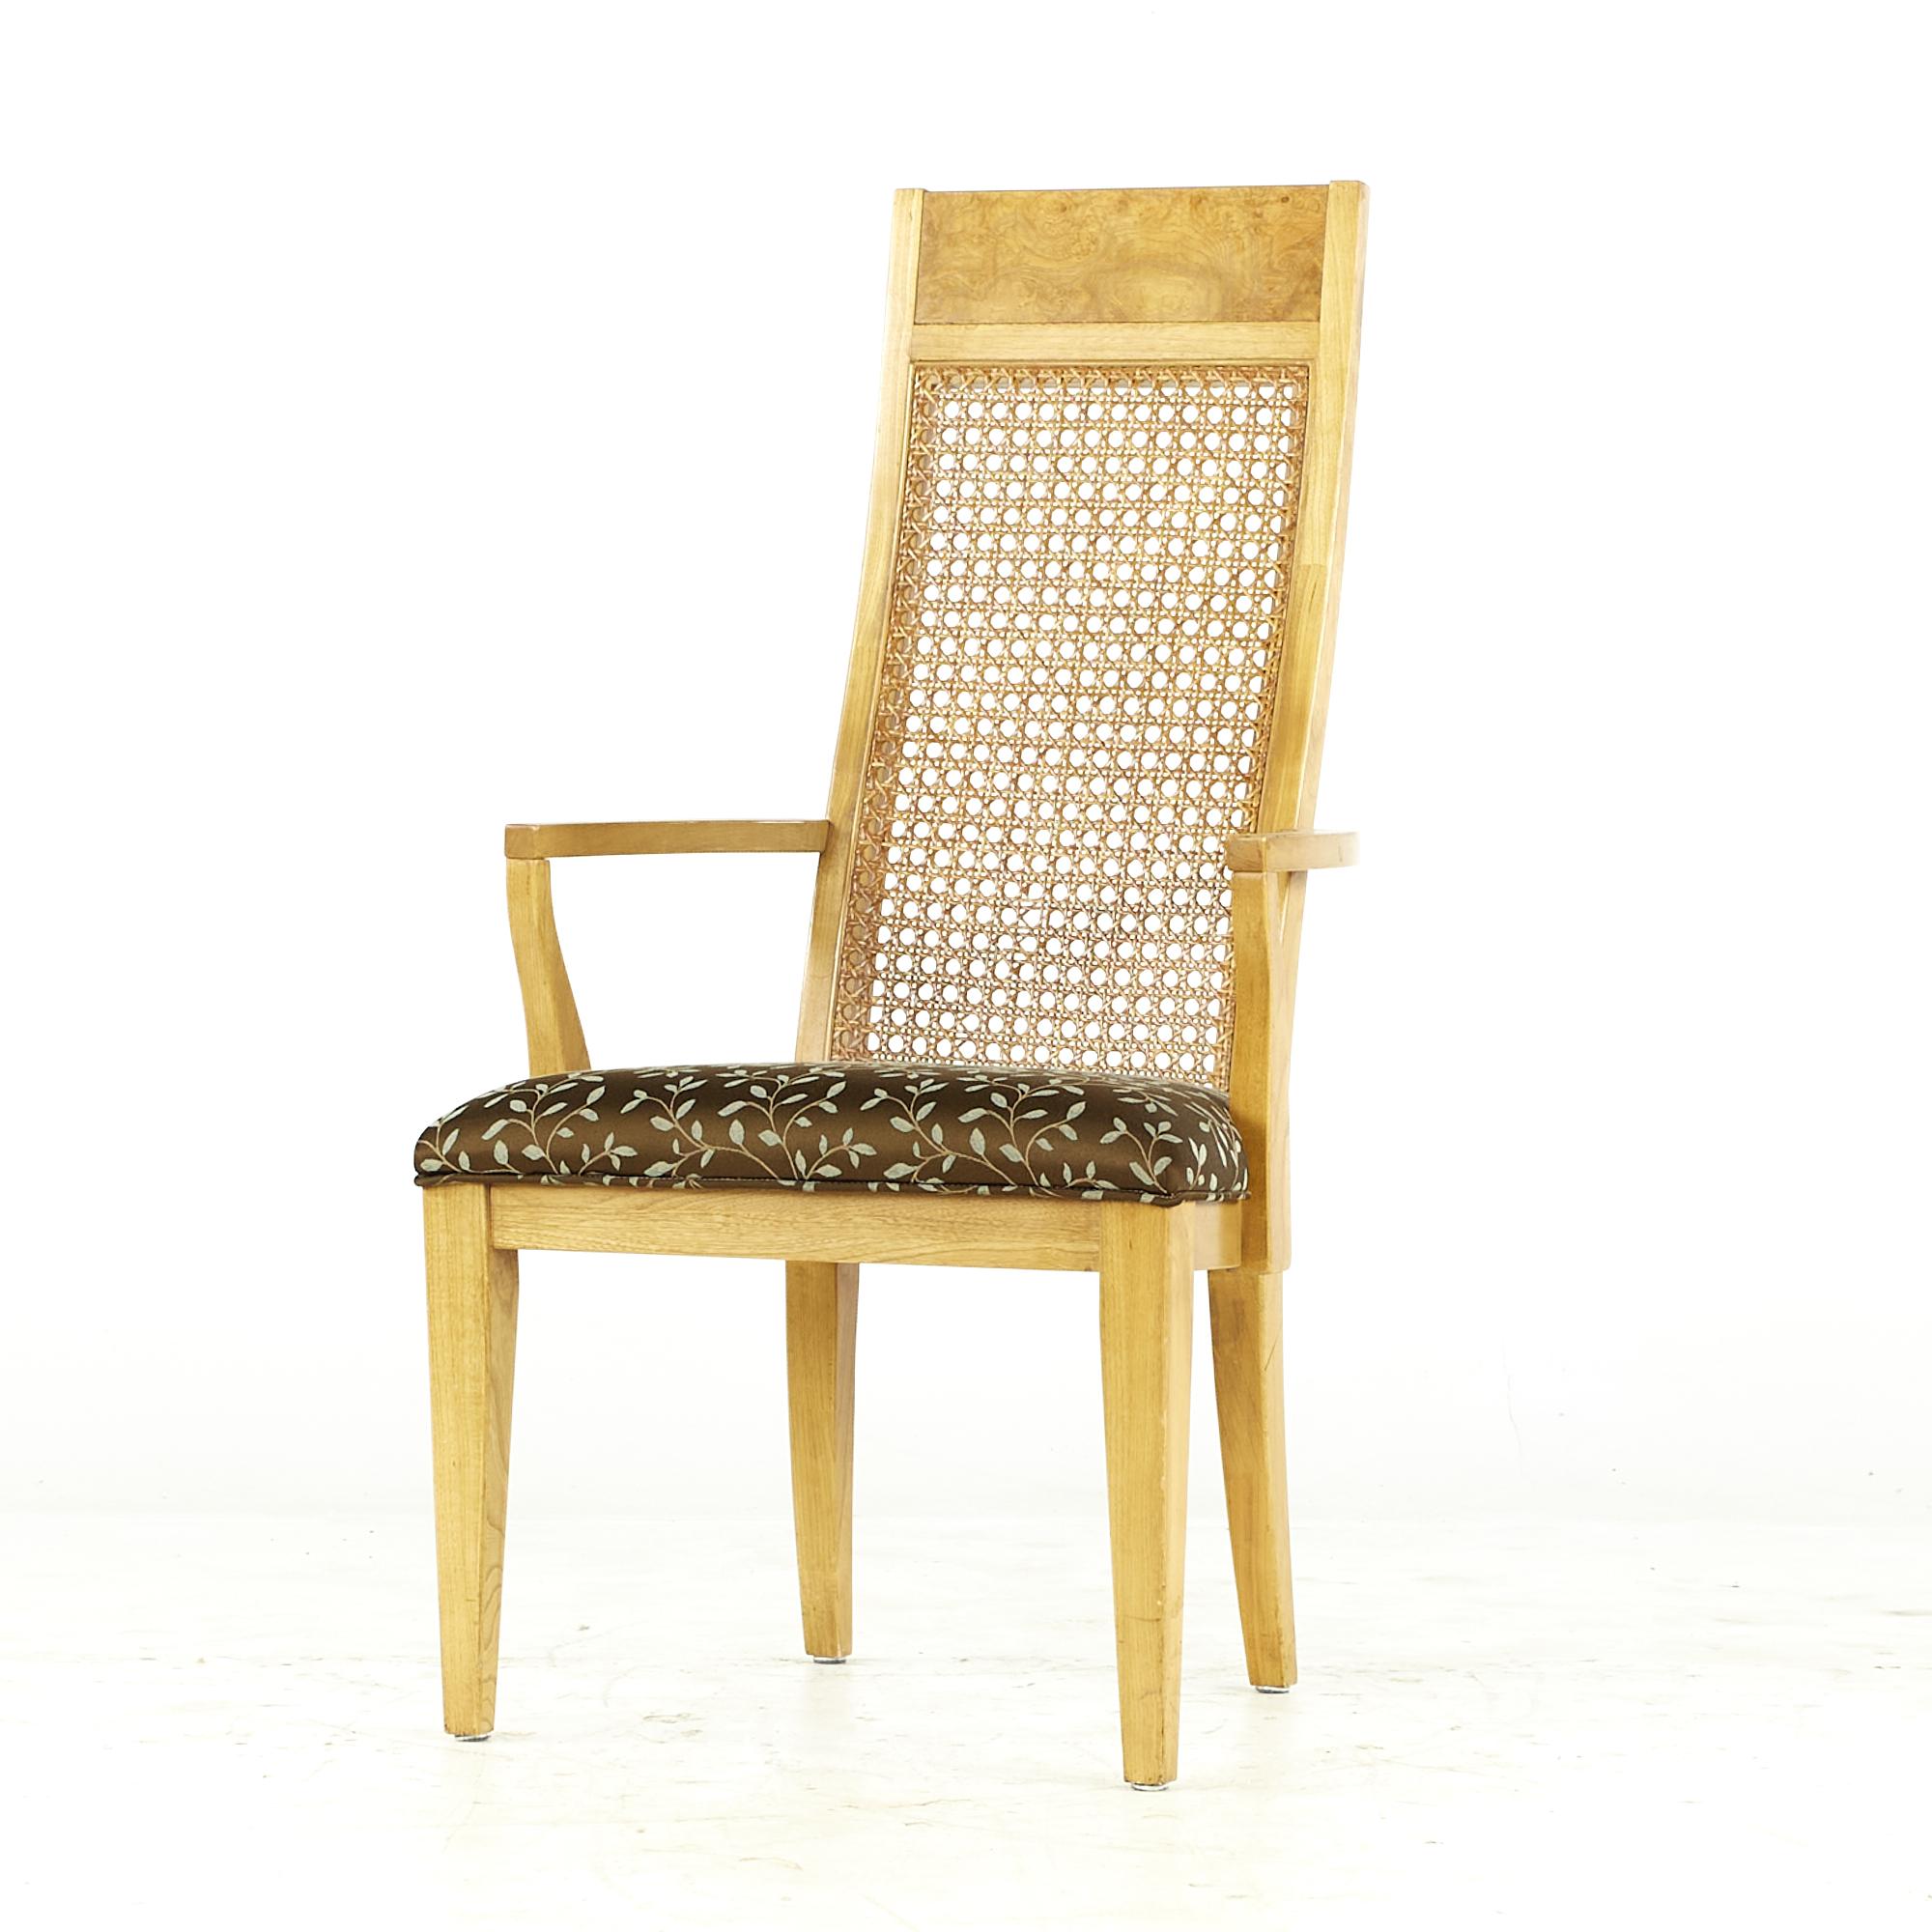 Fin du 20e siècle Lane Mid Century Burlwood and Cane Dining Chairs - Set of 6 en vente